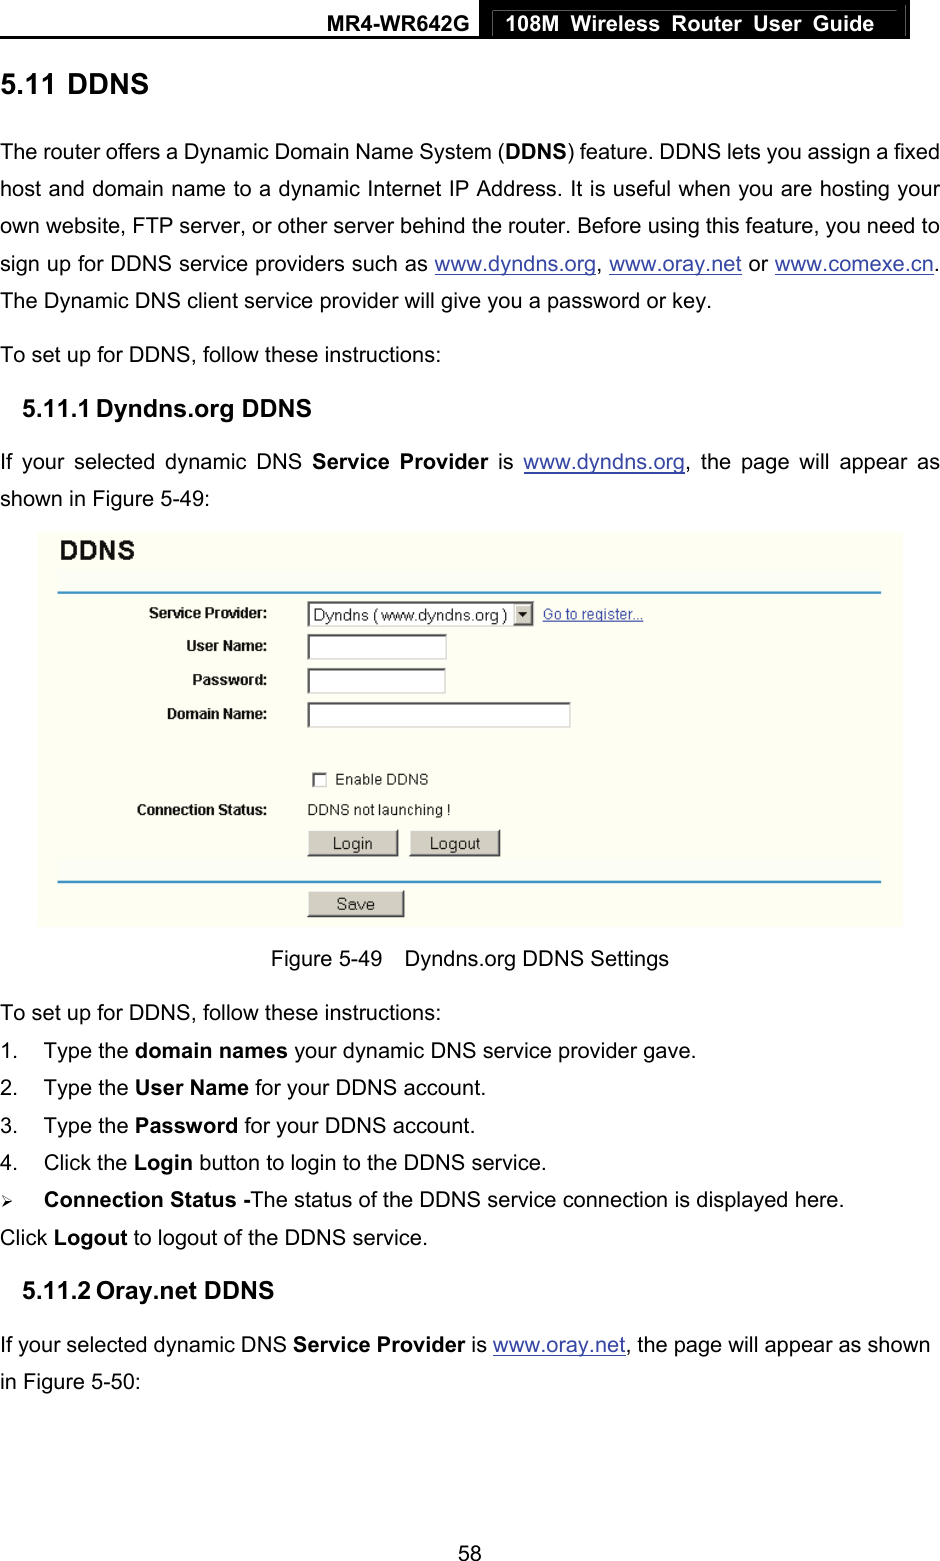 MR4-WR642G 108M Wireless Router User Guide   585.11 DDNS The router offers a Dynamic Domain Name System (DDNS) feature. DDNS lets you assign a fixed host and domain name to a dynamic Internet IP Address. It is useful when you are hosting your own website, FTP server, or other server behind the router. Before using this feature, you need to sign up for DDNS service providers such as www.dyndns.org, www.oray.net or www.comexe.cn. The Dynamic DNS client service provider will give you a password or key. To set up for DDNS, follow these instructions: 5.11.1 Dyndns.org DDNS If your selected dynamic DNS Service Provider is www.dyndns.org, the page will appear as shown in Figure 5-49:  Figure 5-49    Dyndns.org DDNS Settings To set up for DDNS, follow these instructions: 1. Type the domain names your dynamic DNS service provider gave.   2. Type the User Name for your DDNS account.   3. Type the Password for your DDNS account.   4. Click the Login button to login to the DDNS service. ¾ Connection Status -The status of the DDNS service connection is displayed here. Click Logout to logout of the DDNS service. 5.11.2 Oray.net DDNS If your selected dynamic DNS Service Provider is www.oray.net, the page will appear as shown in Figure 5-50: 